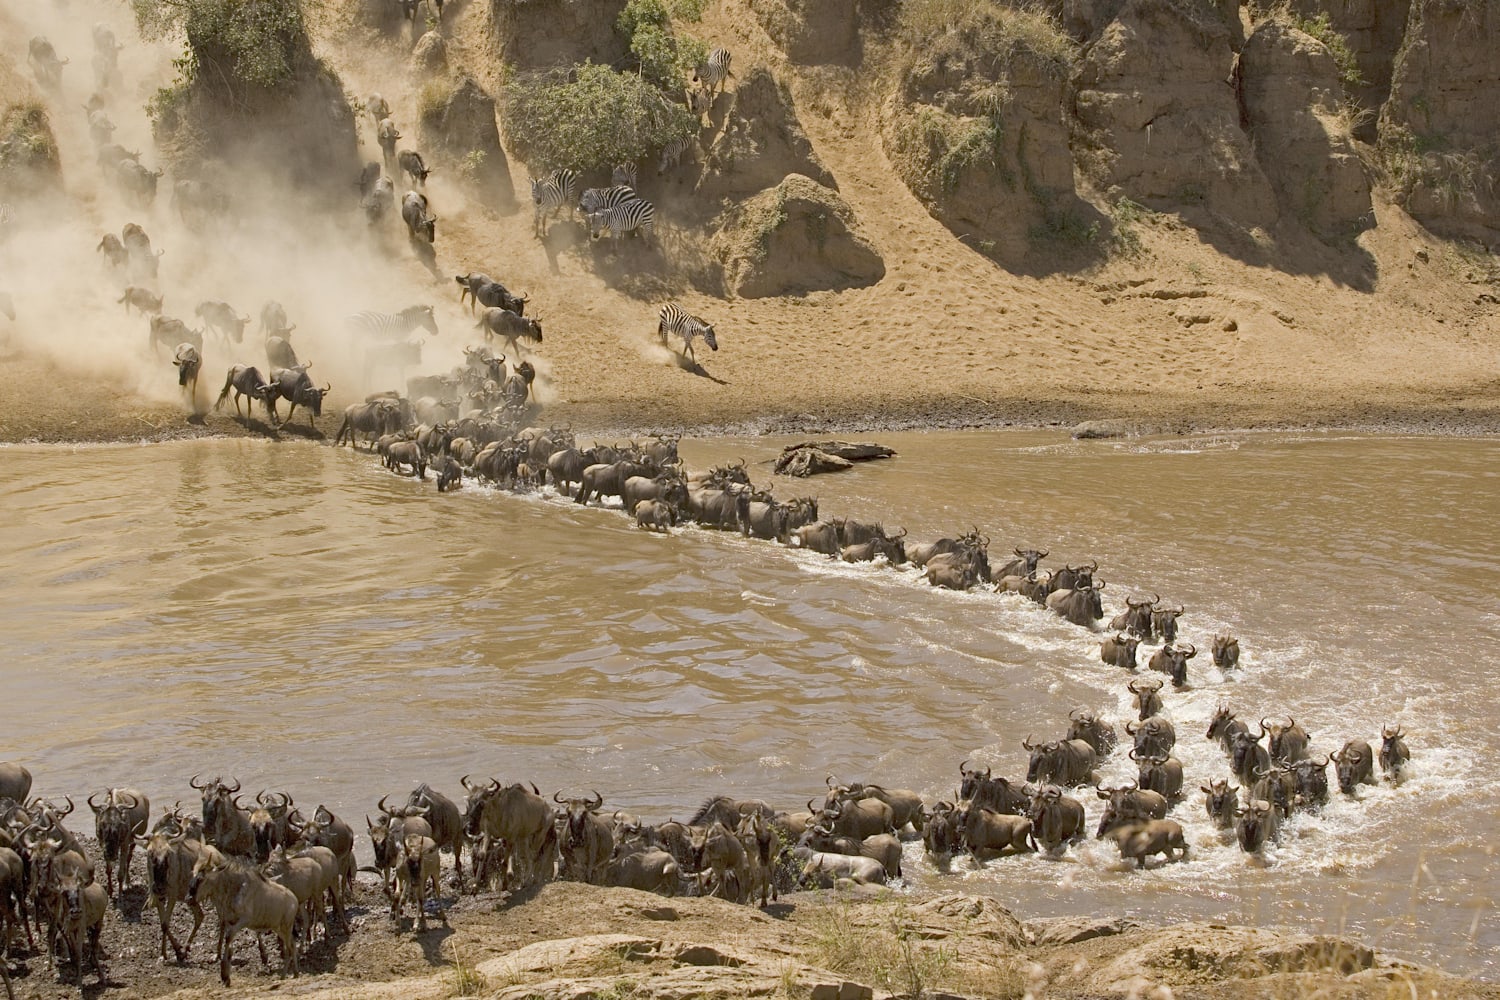 The wildest animal migrations